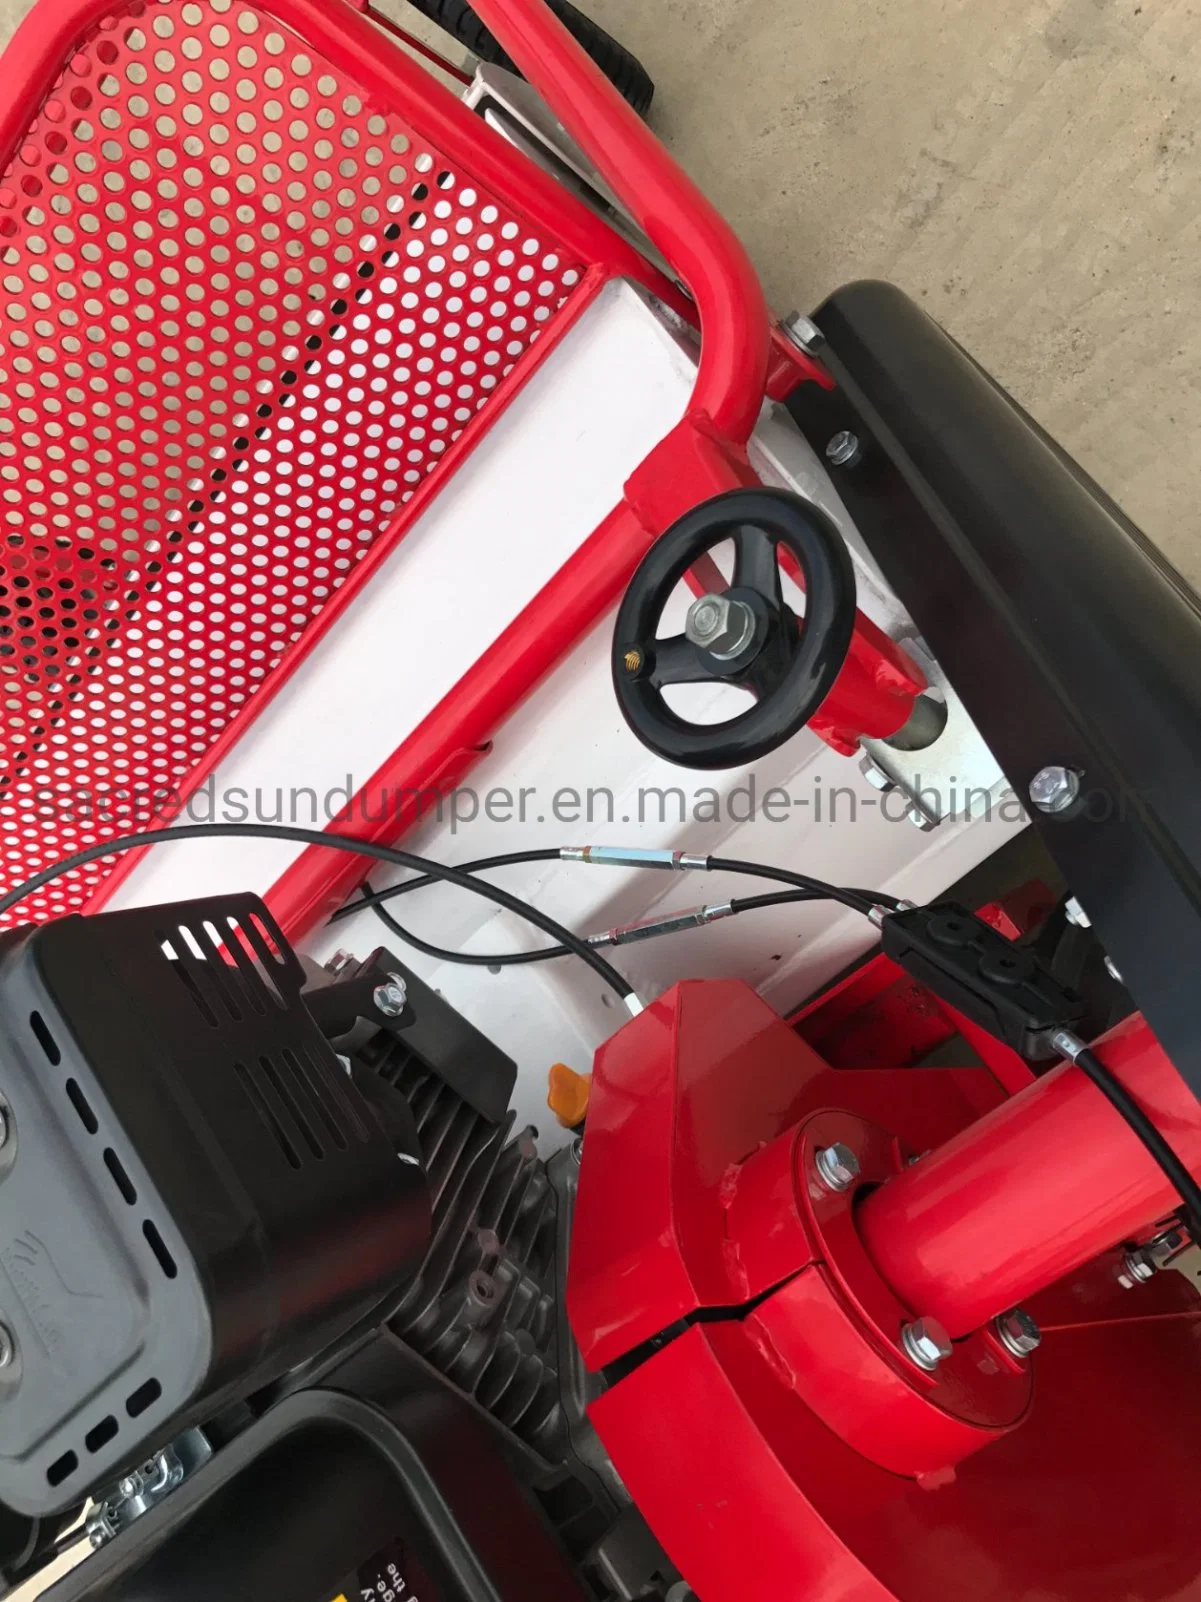 8HP Lawn Mower Grass Mower Mower Grass Trimmer Rotary Mower Weed Cutter Self Propelled with High quality/High cost performance 